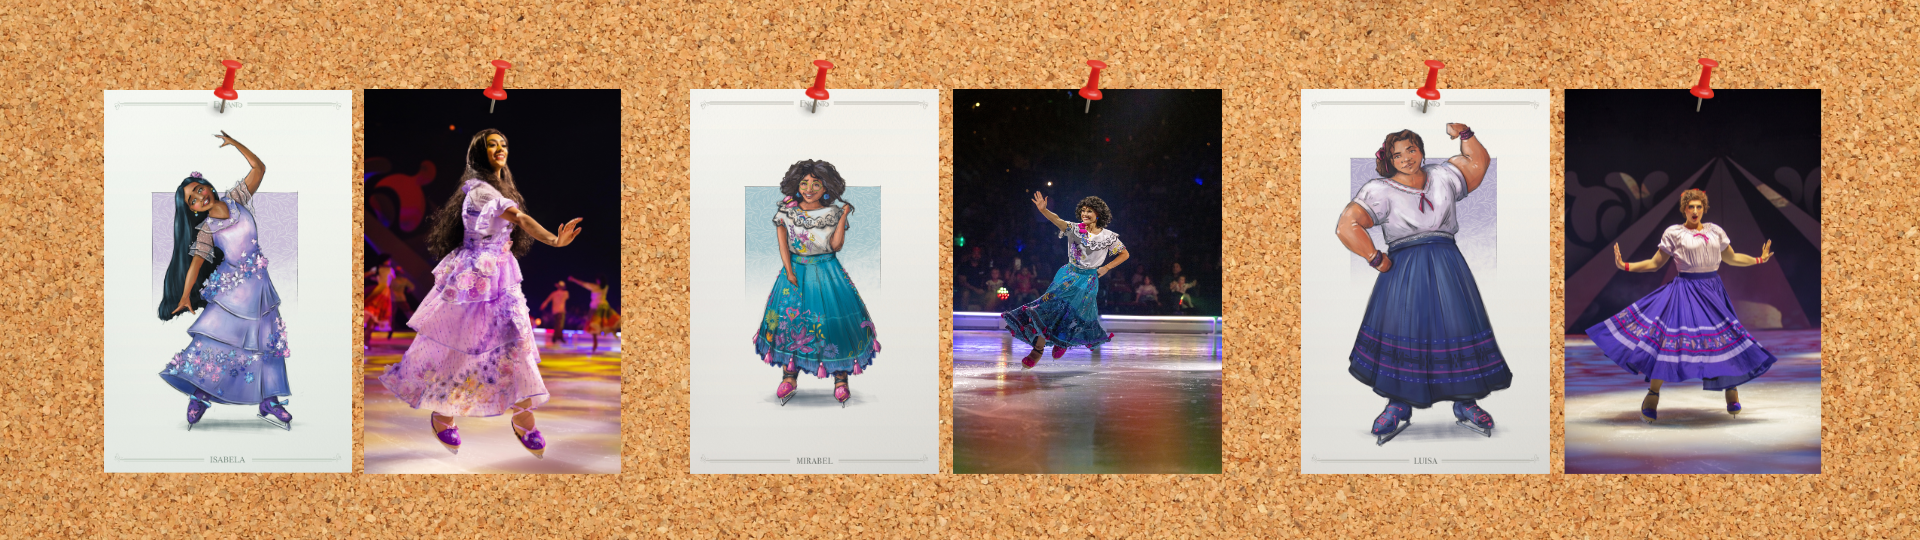 Encanto Archives - The Official Site of Disney On Ice